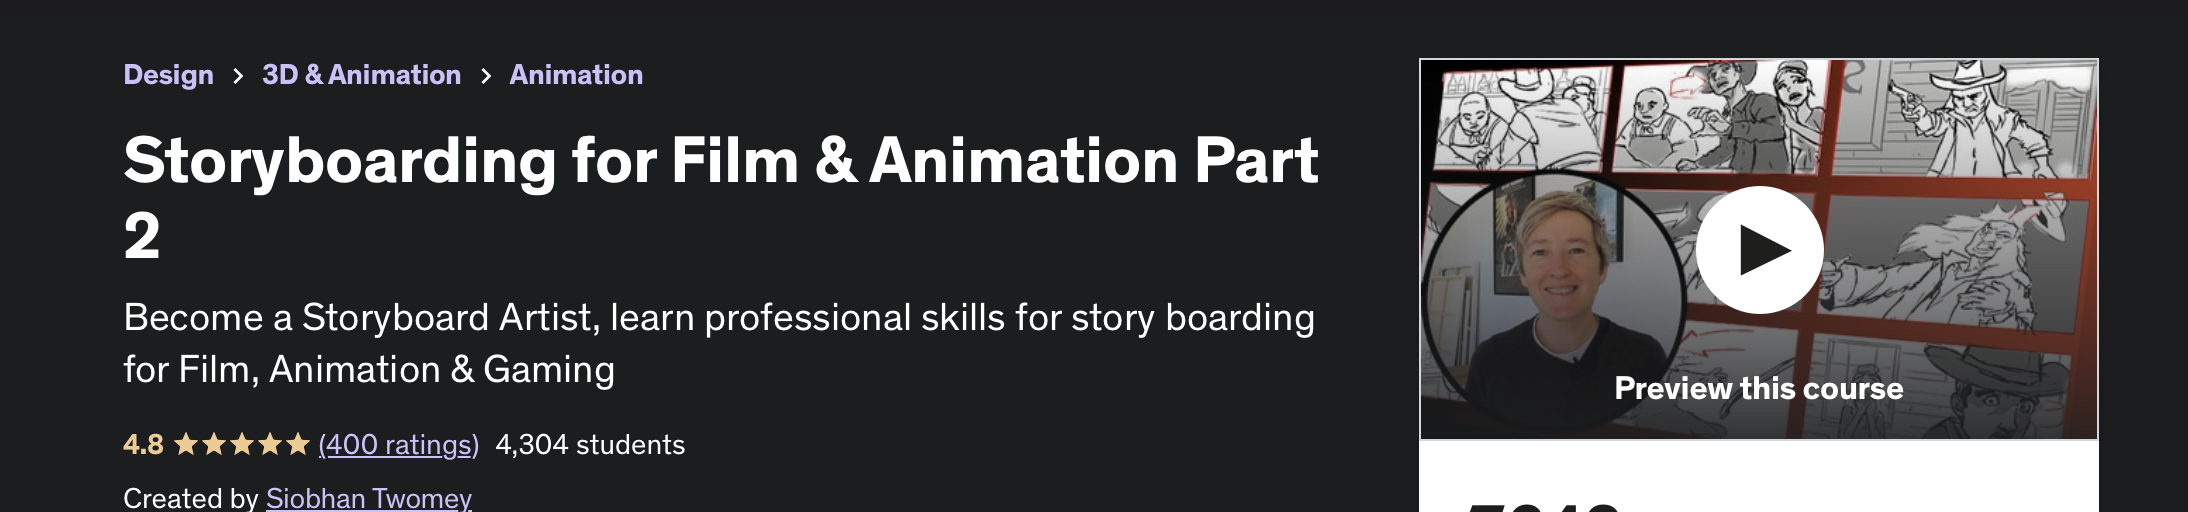 Storyboarding for Film and Animation Part 2